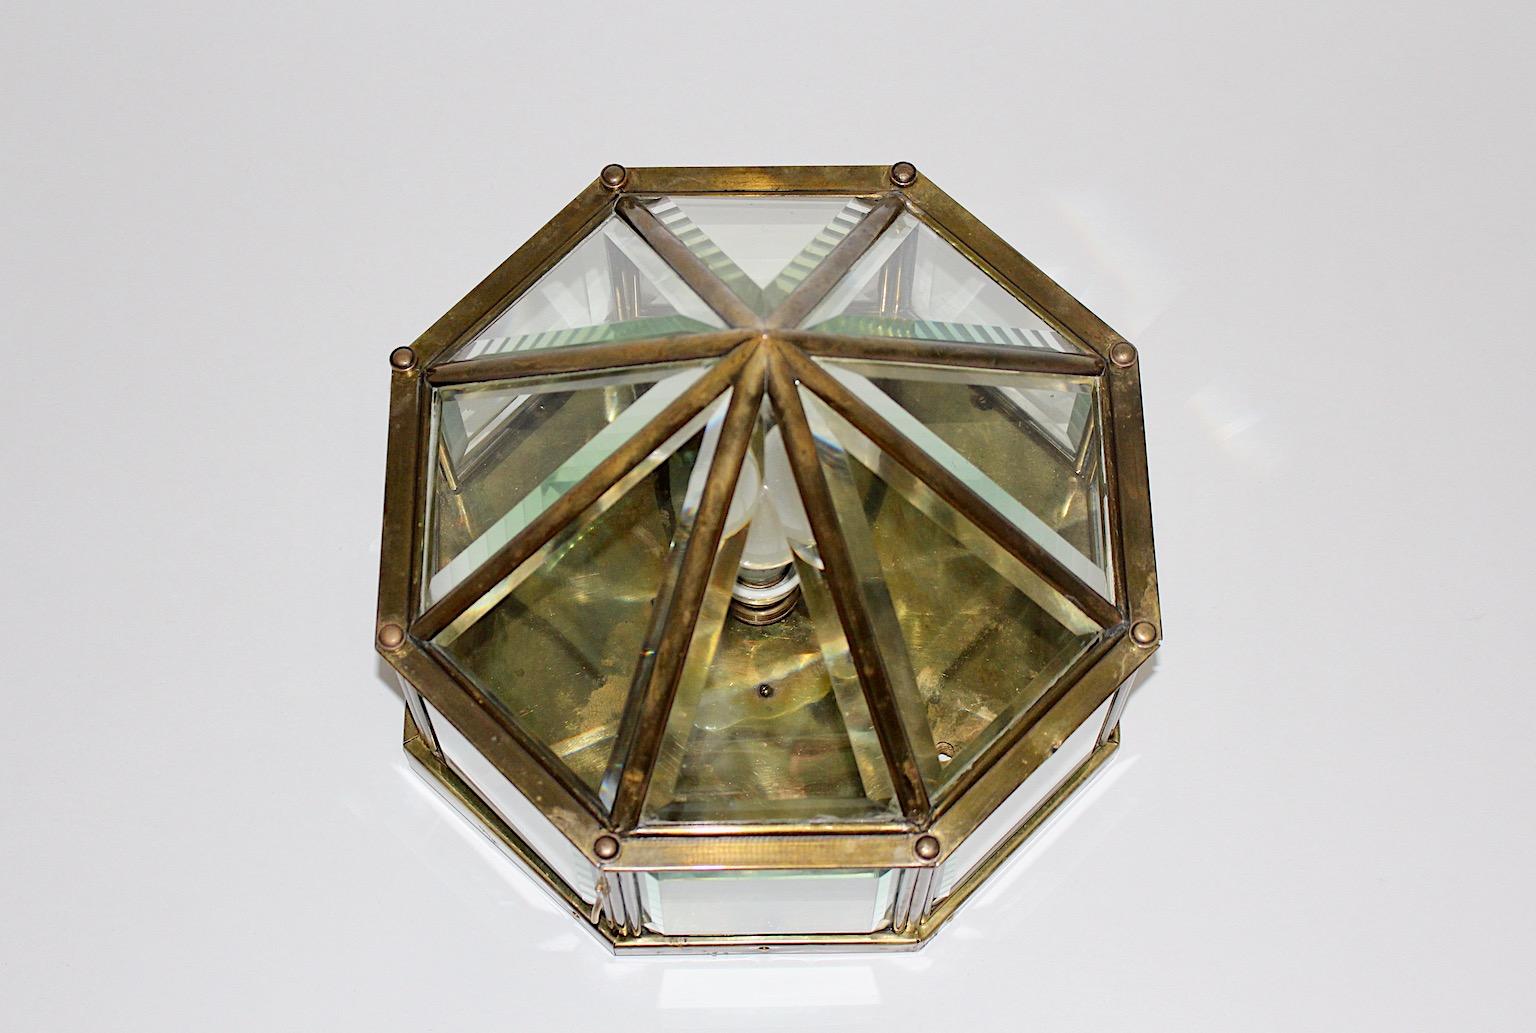 Art Deco vintage triangle like flush mount or lighting from brass and facetted clear glass Josef Hoffmann style circa 1920 Austria.
A beautiful Art Deco flush mount with 16 geometric and facetted clear glass sheets with one E 27 porcelain